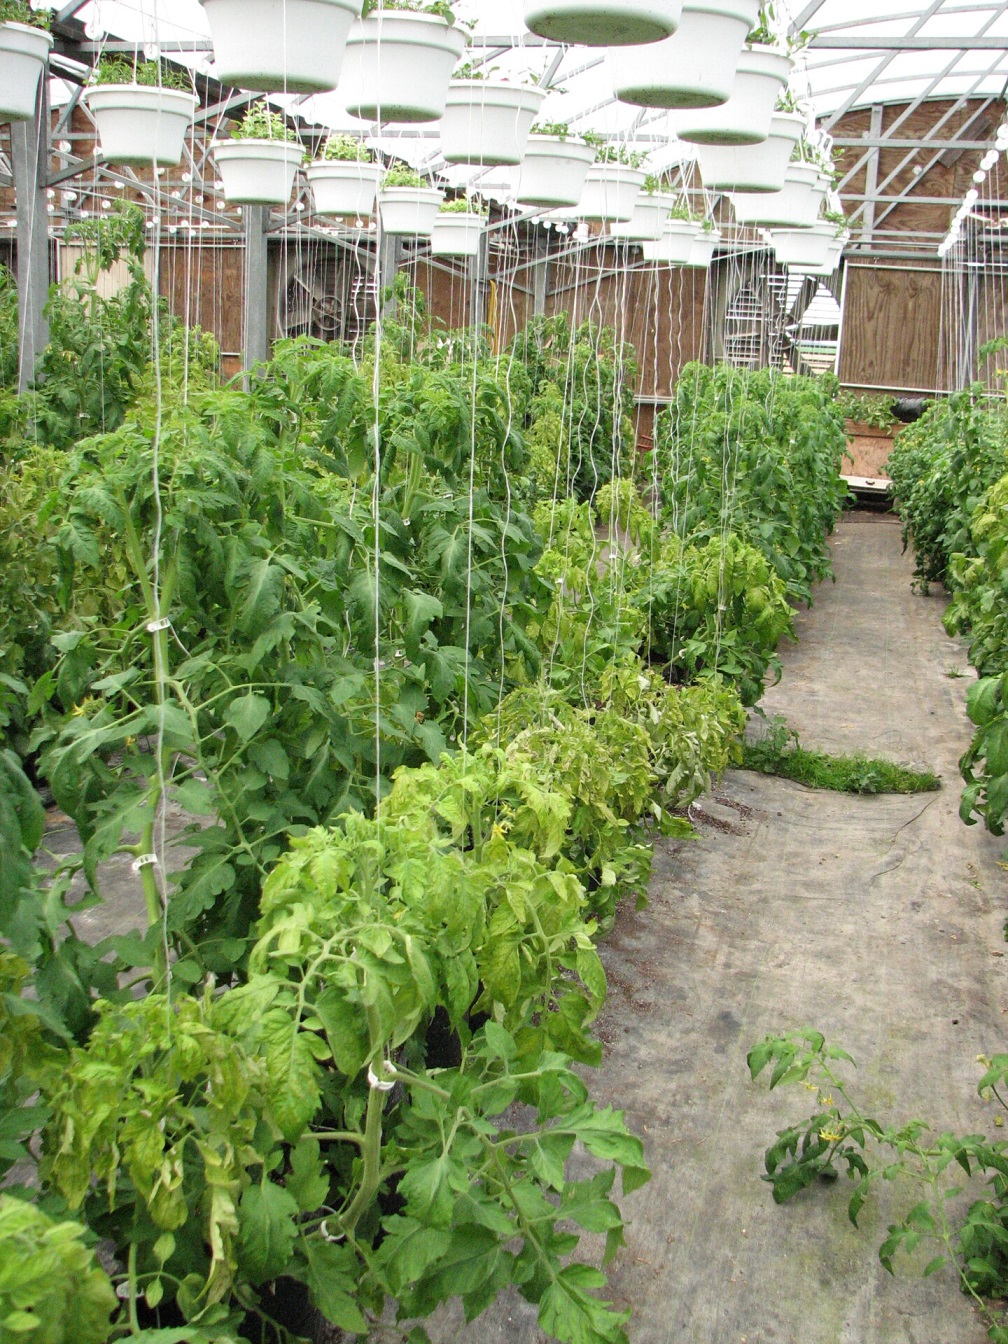 Figure 1. Symptoms of tomato spotted wilt virus include stunting such can be seen in the tomatoes on the right. Note the baskets of hanging flowers in the greenhouse.